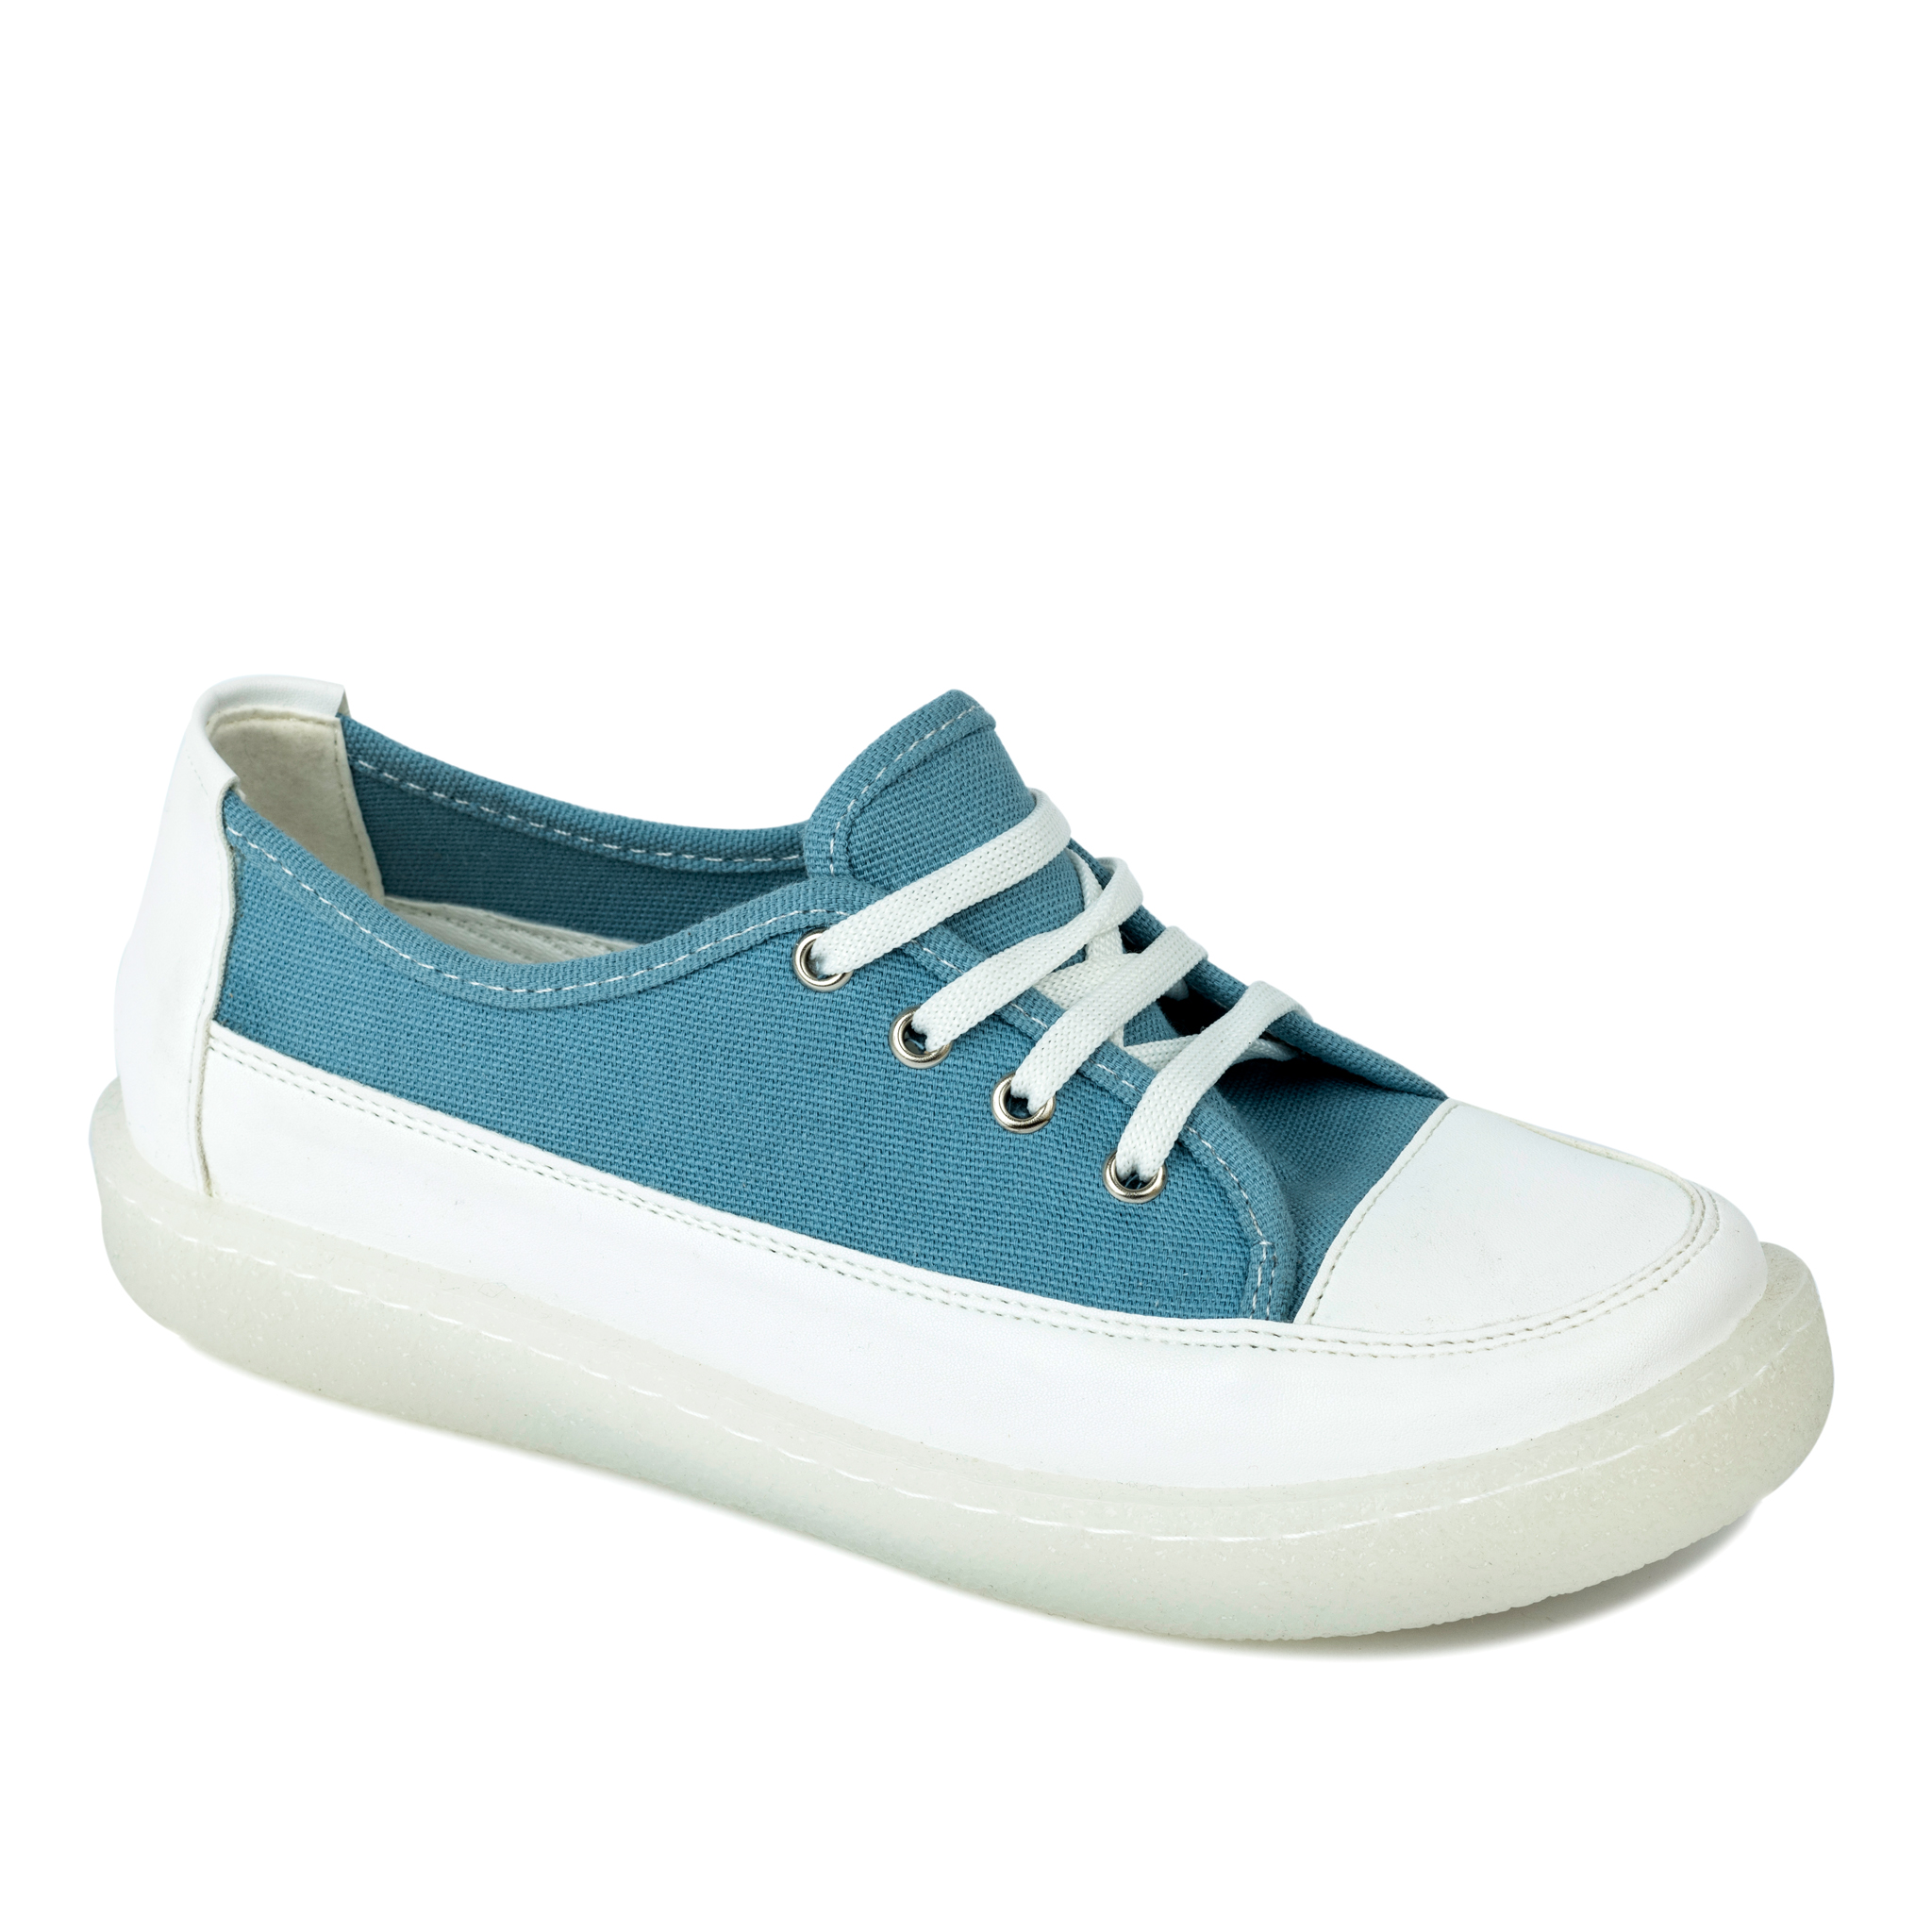 SHALLOW HIGH SOLE SNEAKERS - BLUE